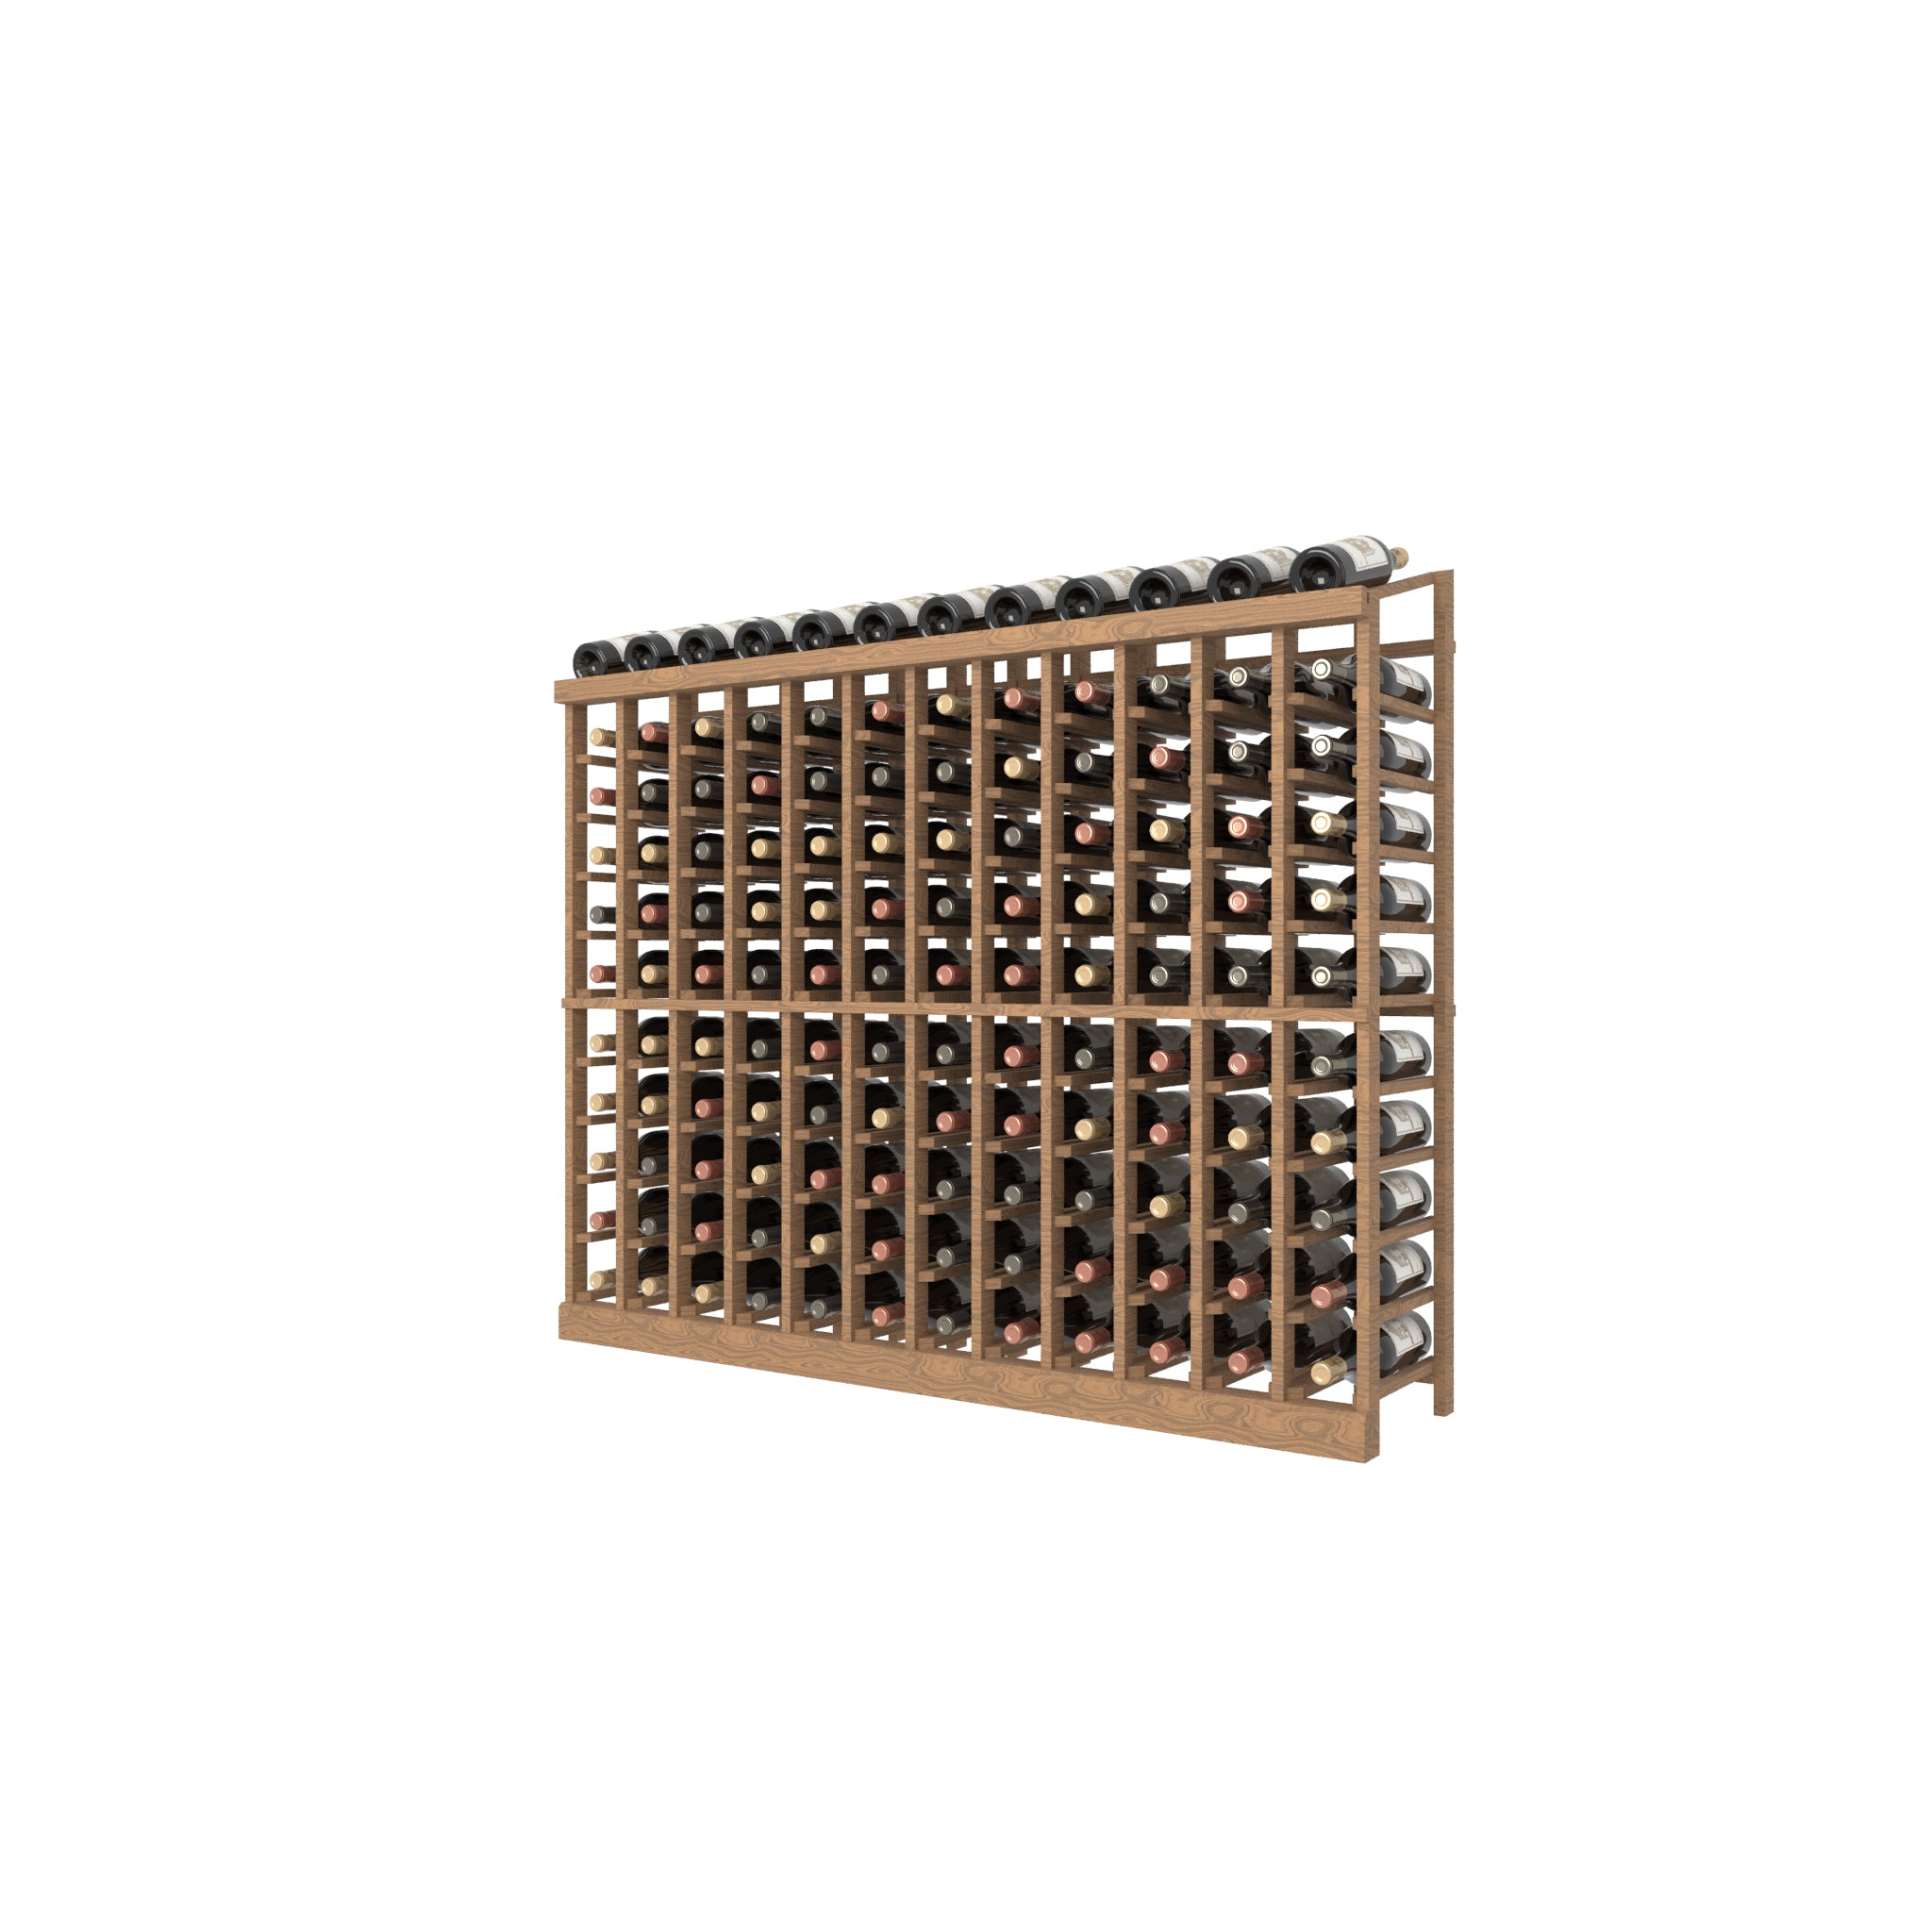 Individual bottle wood Wine Rack with a display row - 12 Column 11 rows